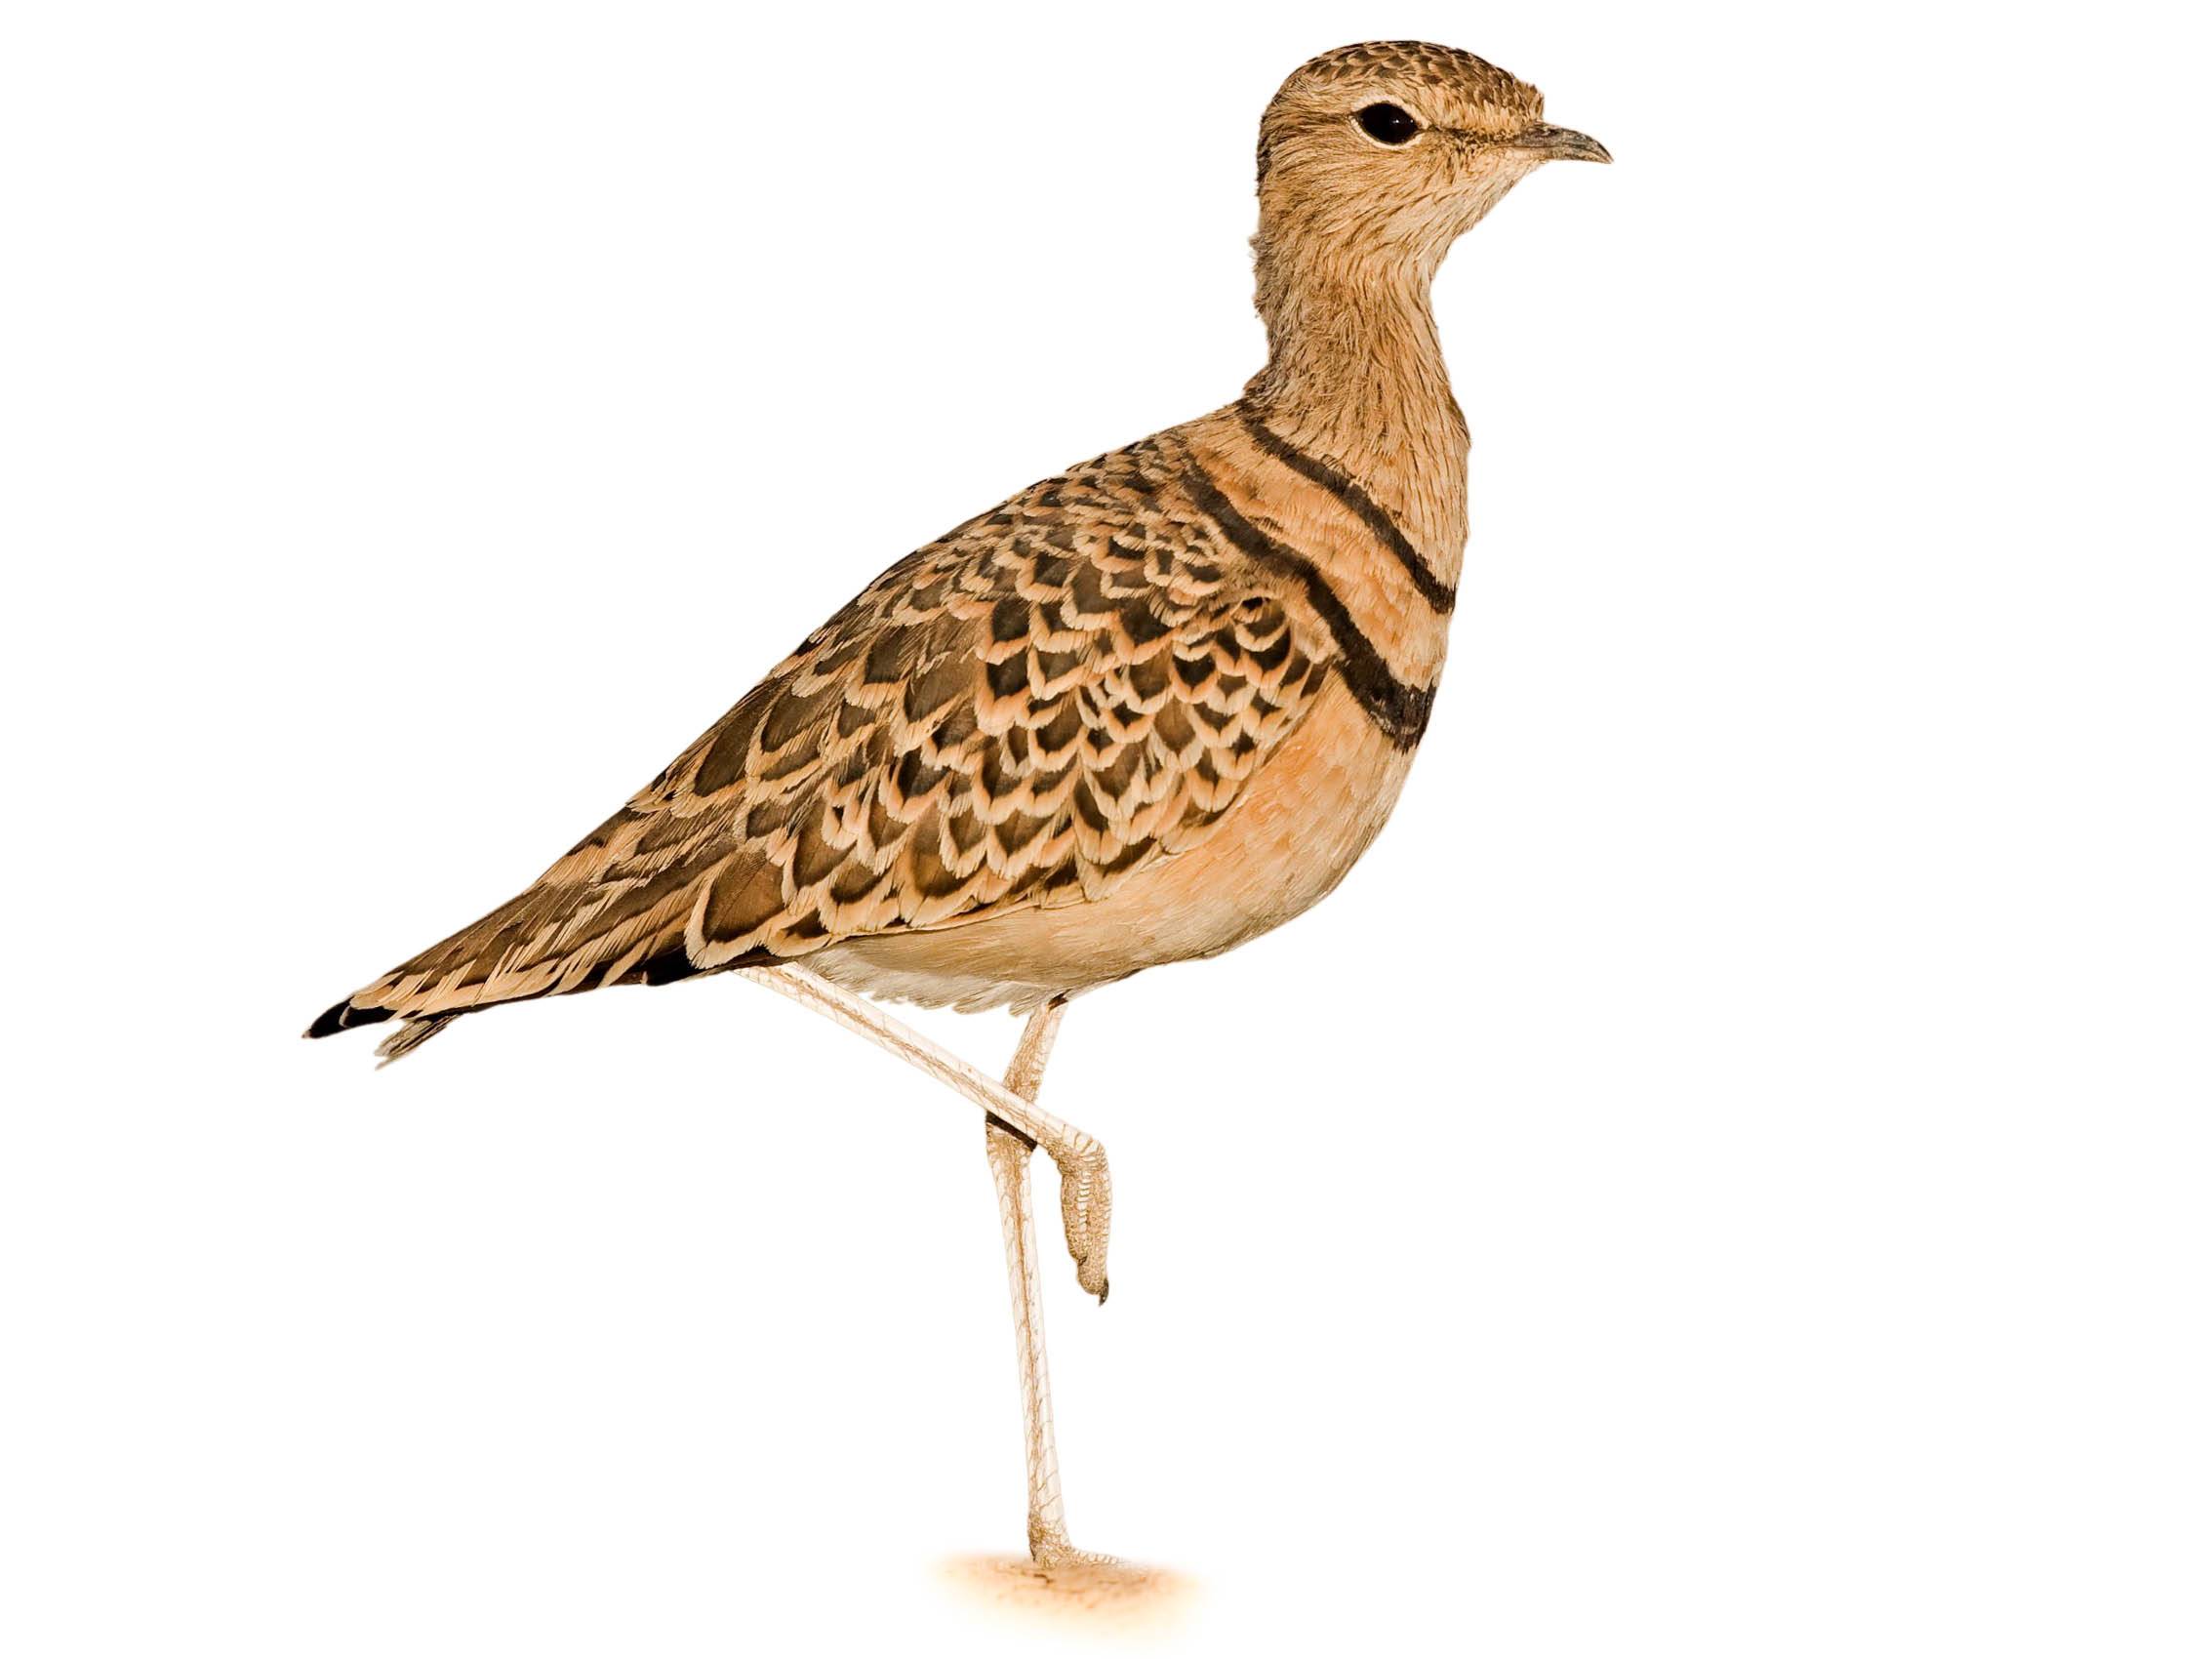 A photo of a Double-banded Courser (Rhinoptilus africanus)